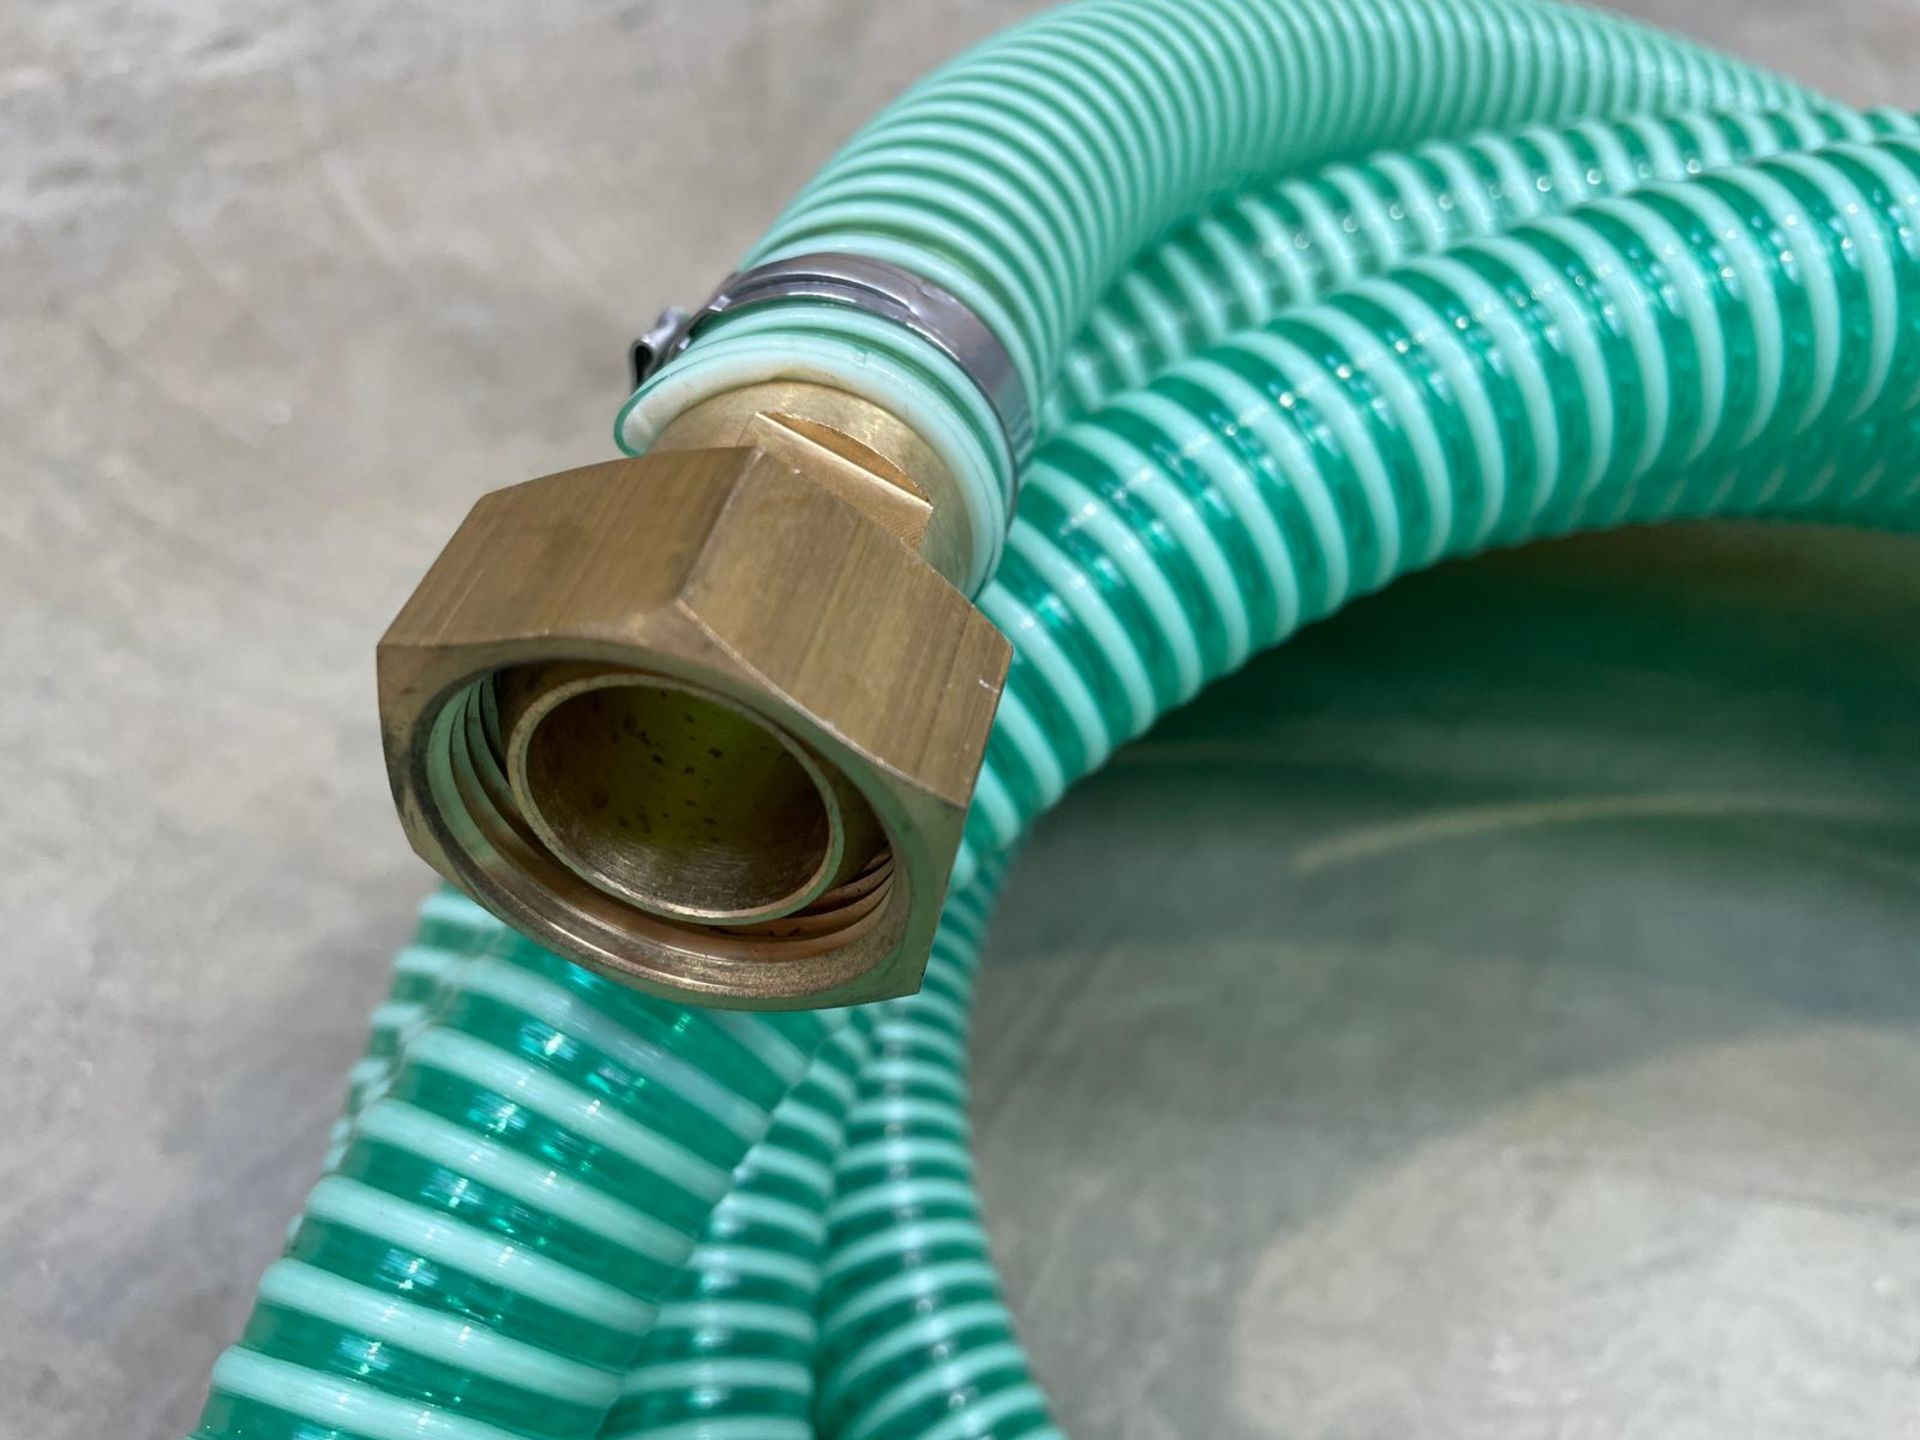 New & Unused - MSA Compatible Aftermarket New Turbo Flow 9 Metre Green Hose & Couplings - Image 3 of 3